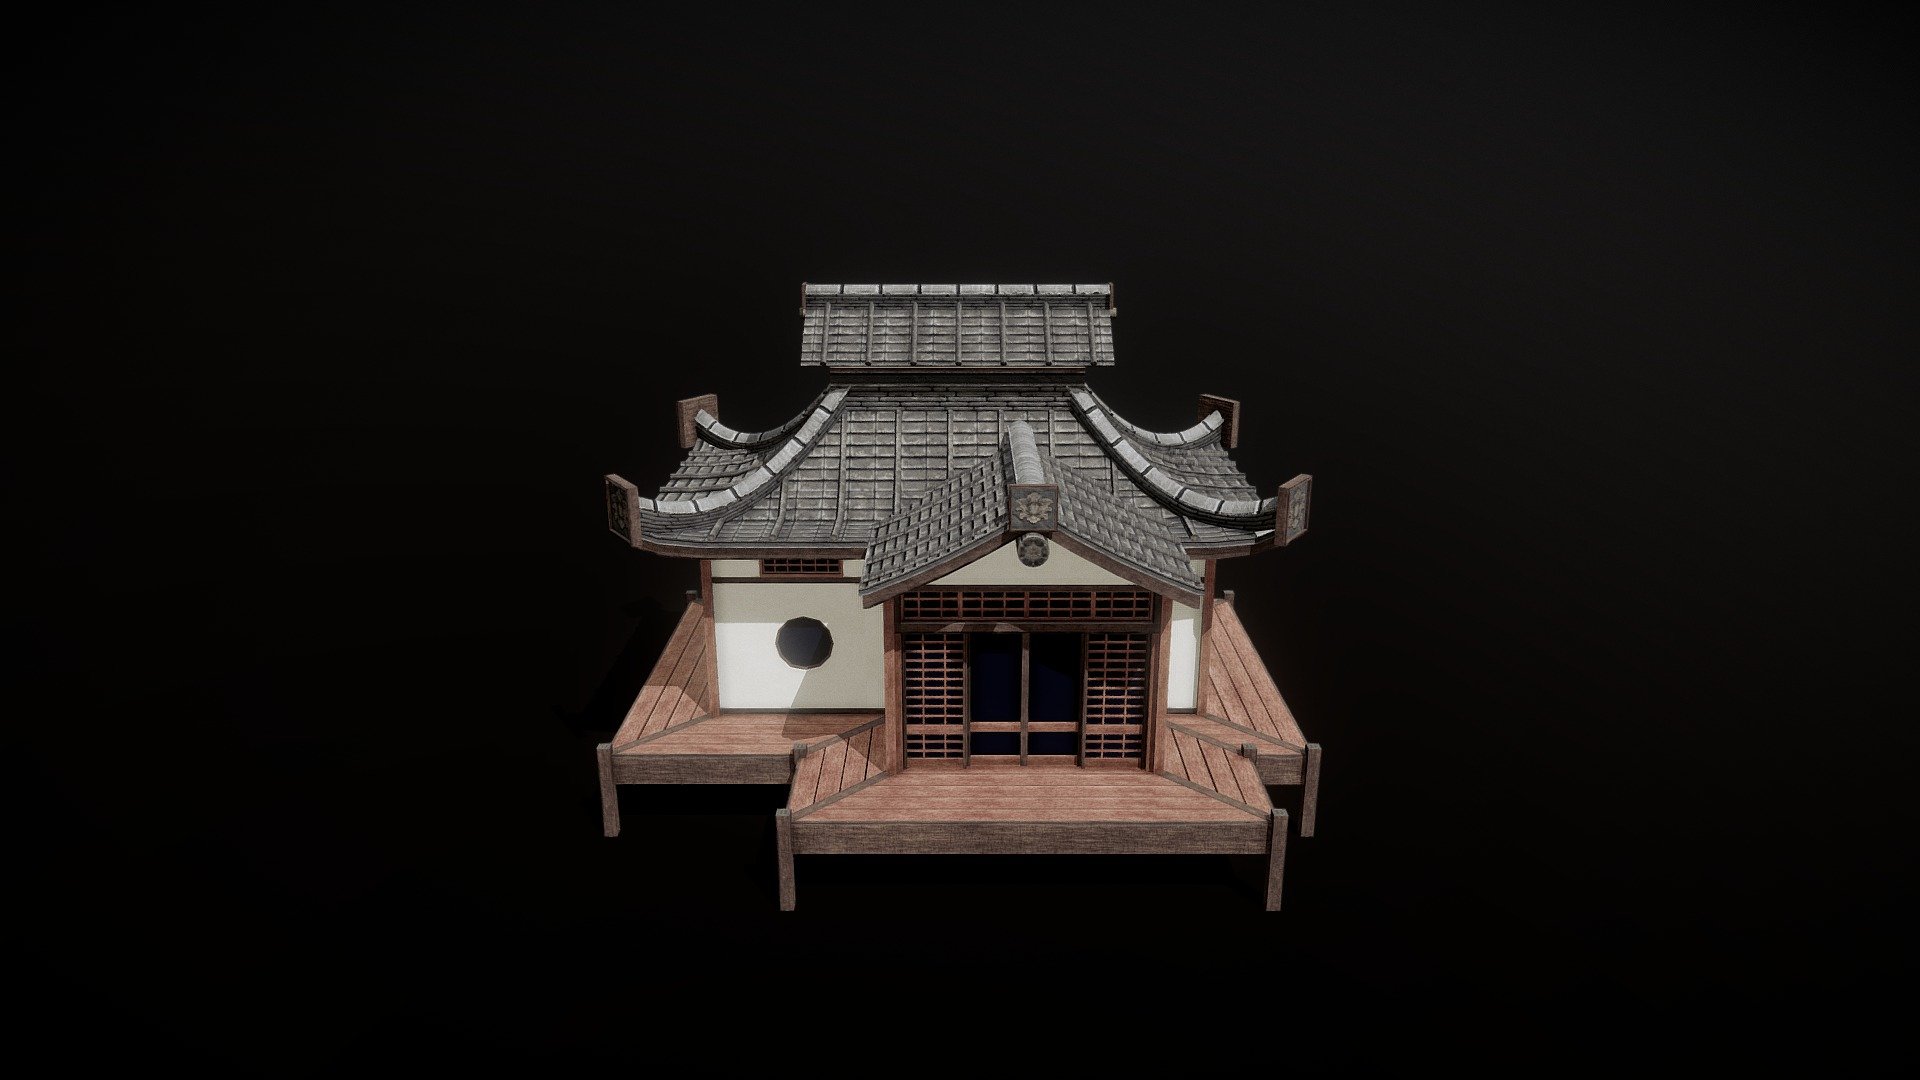 For as long as I can remember I wanted to create a Japanese style environment&hellip; inspired by my love of &ldquo;Ghost of Tsushima